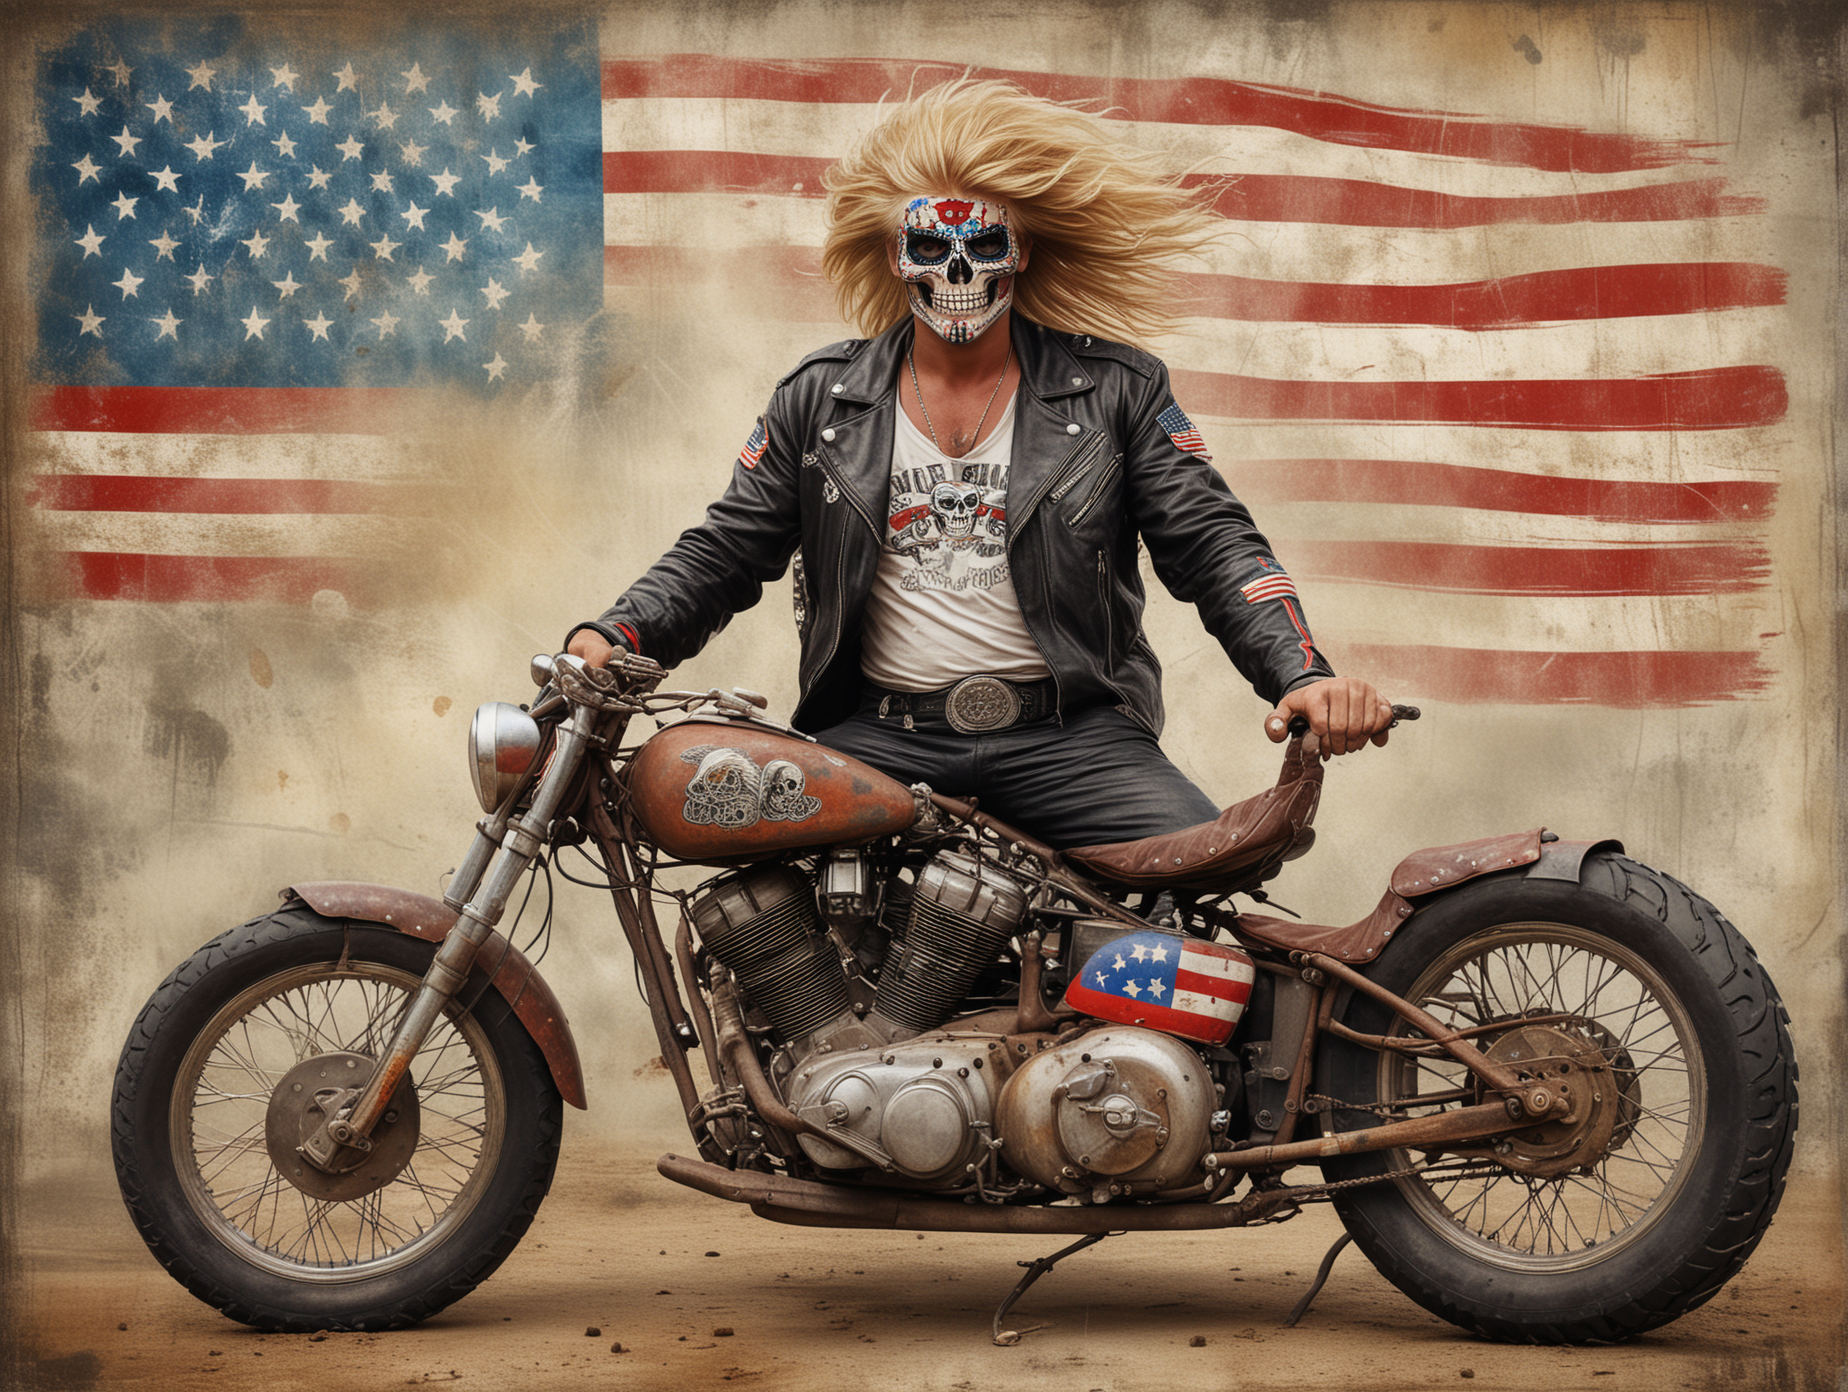 Vintage Motorcycle with Worn Background and Mexican Skulls Art, the rider is Donald Trump with patriotic smile and wind blown hair